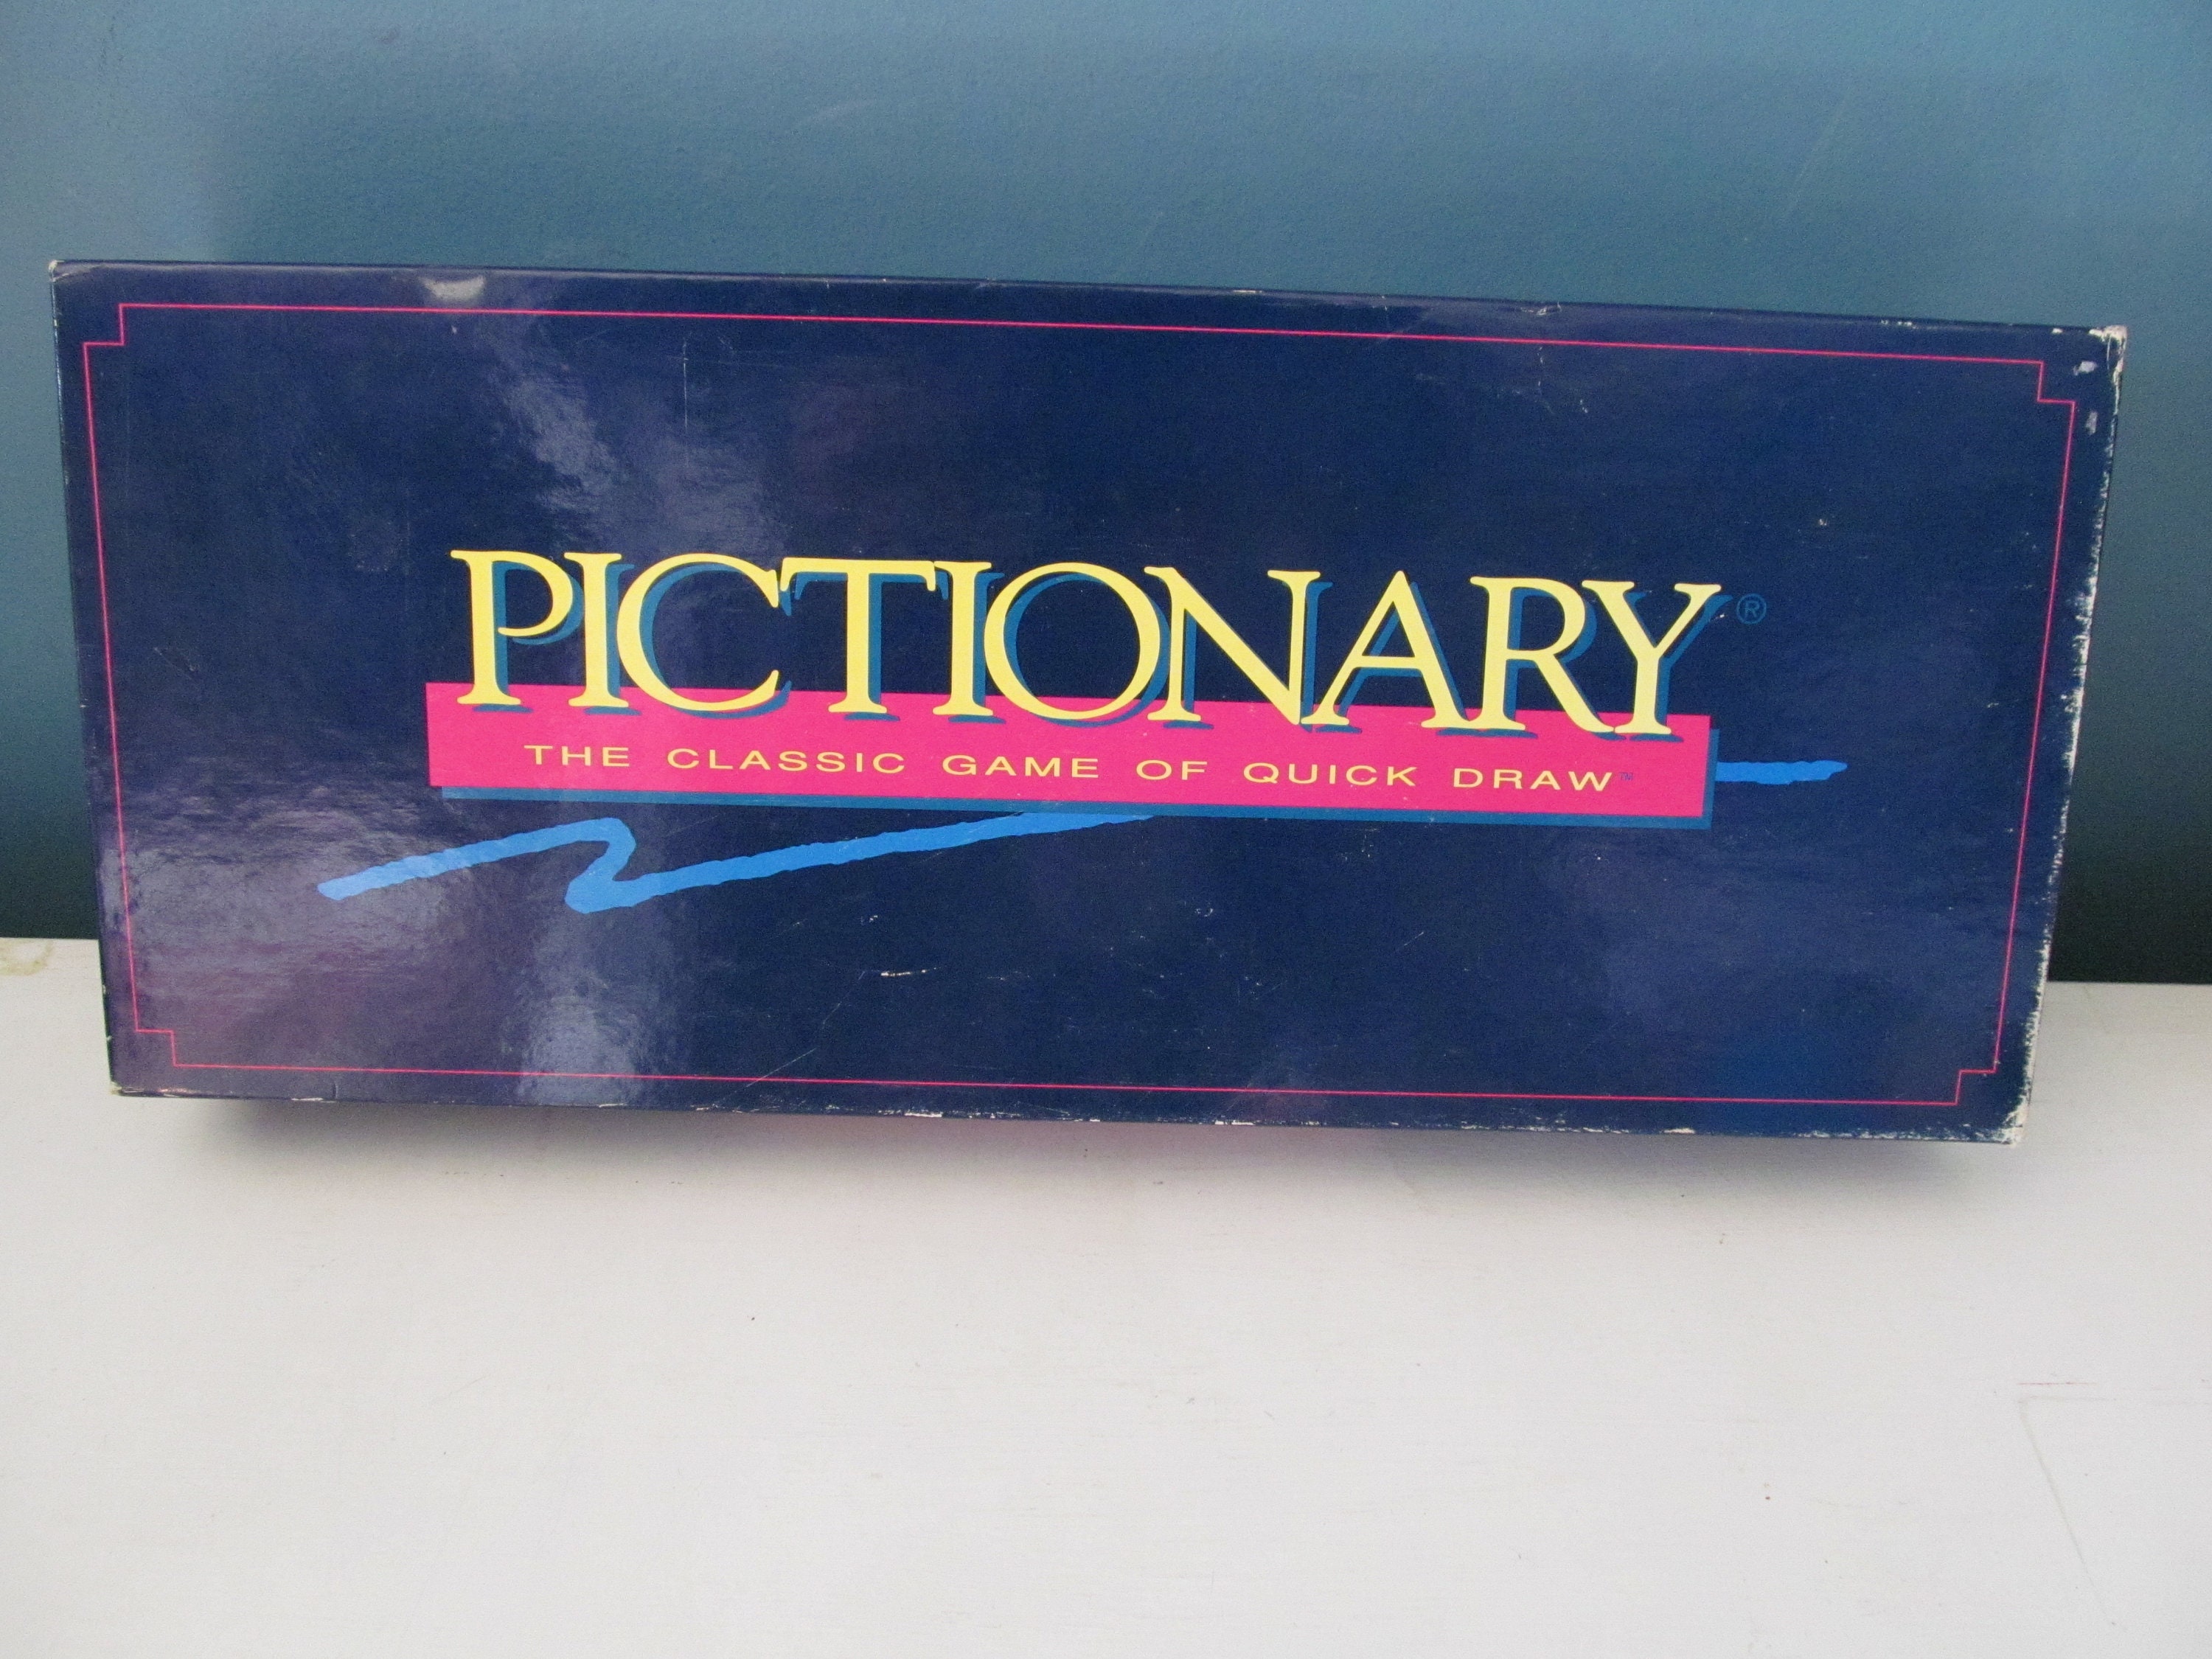 650+ Wonderful Pictionary Words For Kids and Adults  Pictionary words,  Pictionary word list, Pictionary